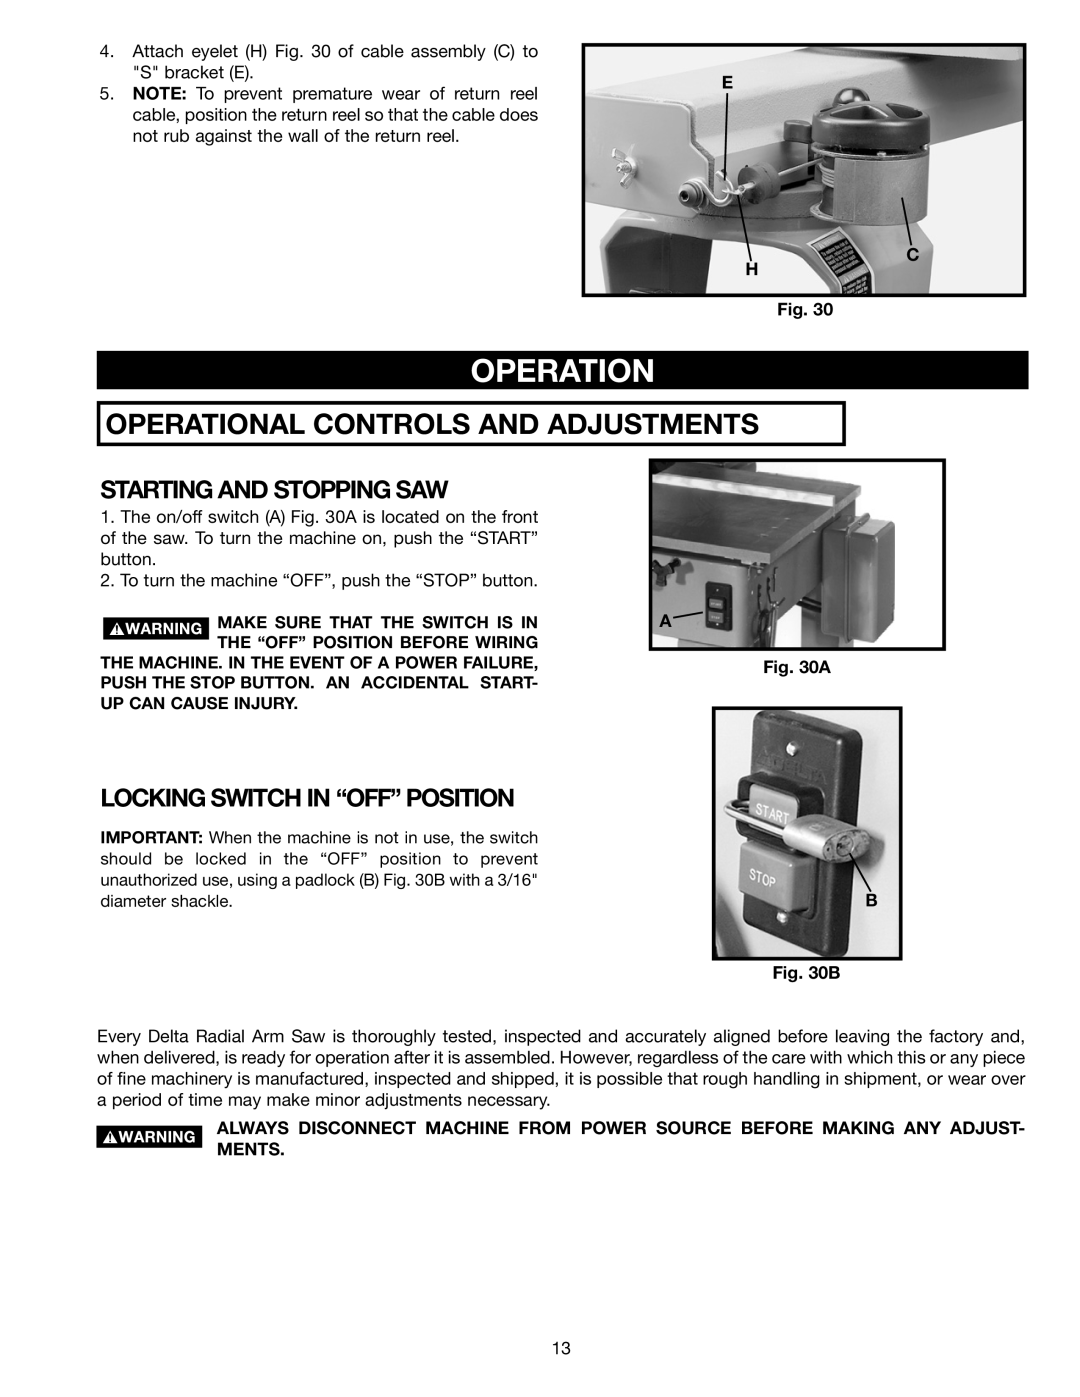 Porter-Cable 16 Operational Controls And Adjustments, Starting And Stopping Saw, Locking Switch In “Off” Position, B 